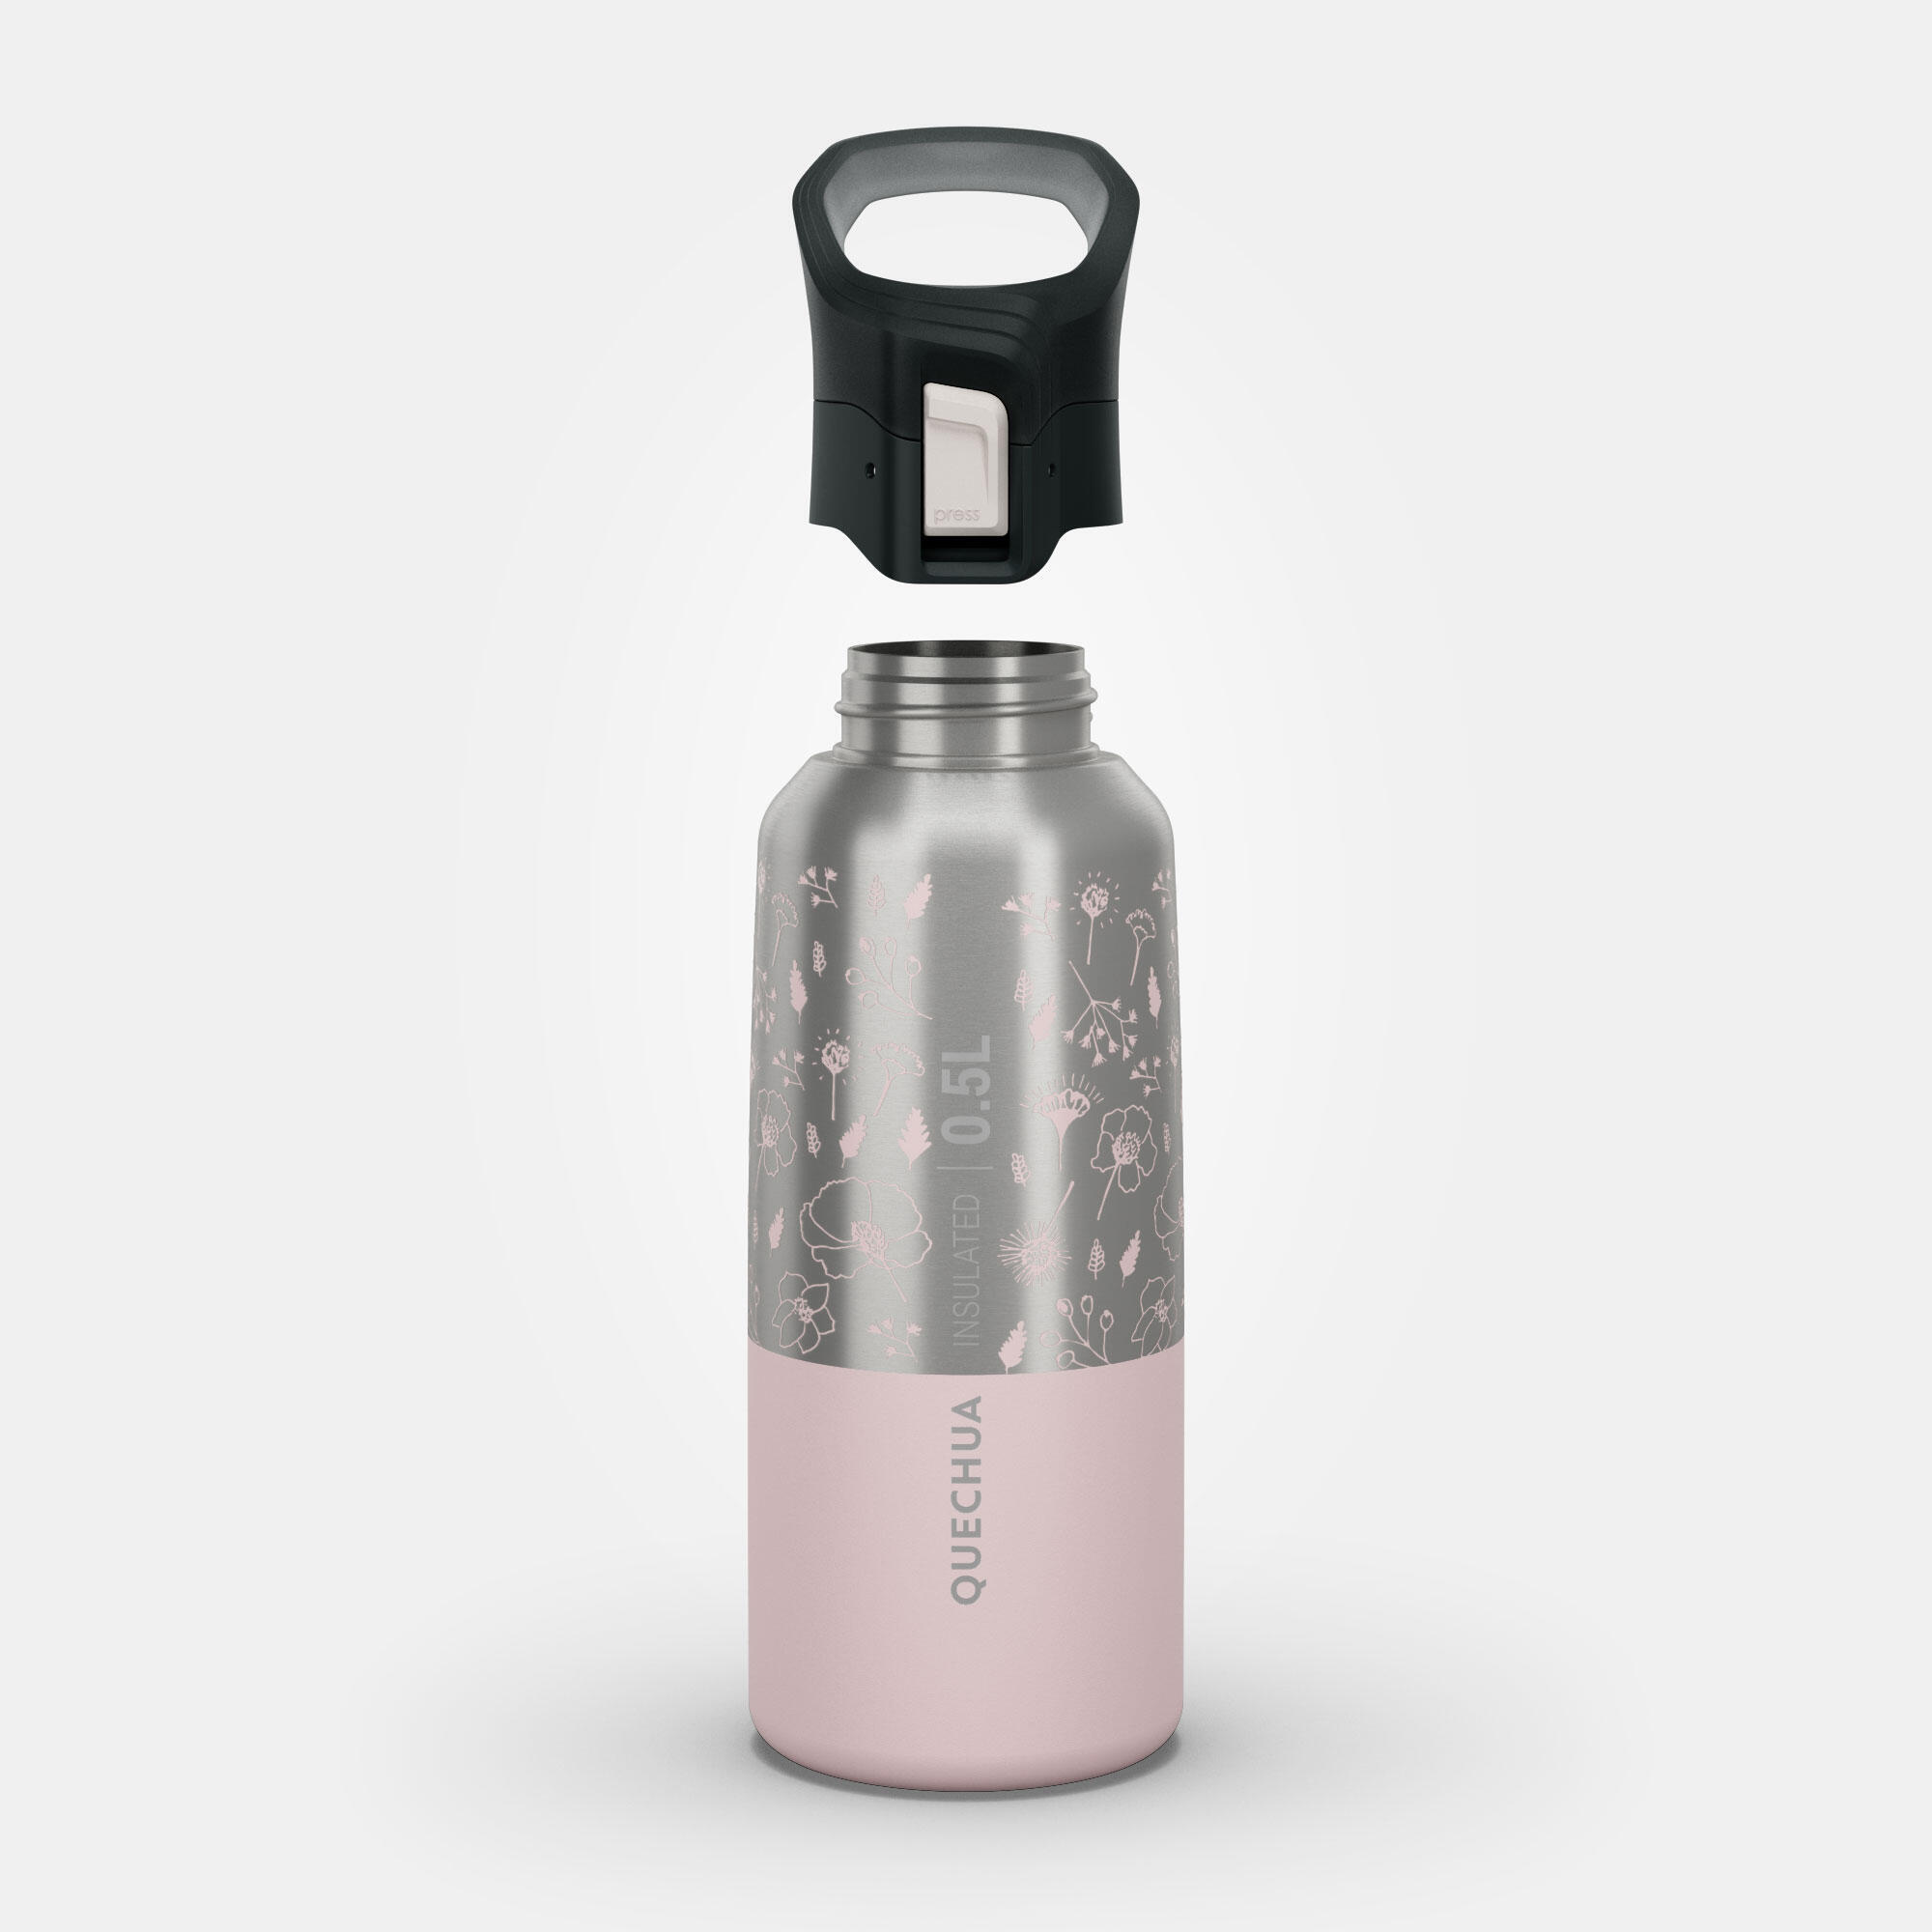 Hiking Insulated Stainless Steel Flask MH500 0.5L Pink 2/12